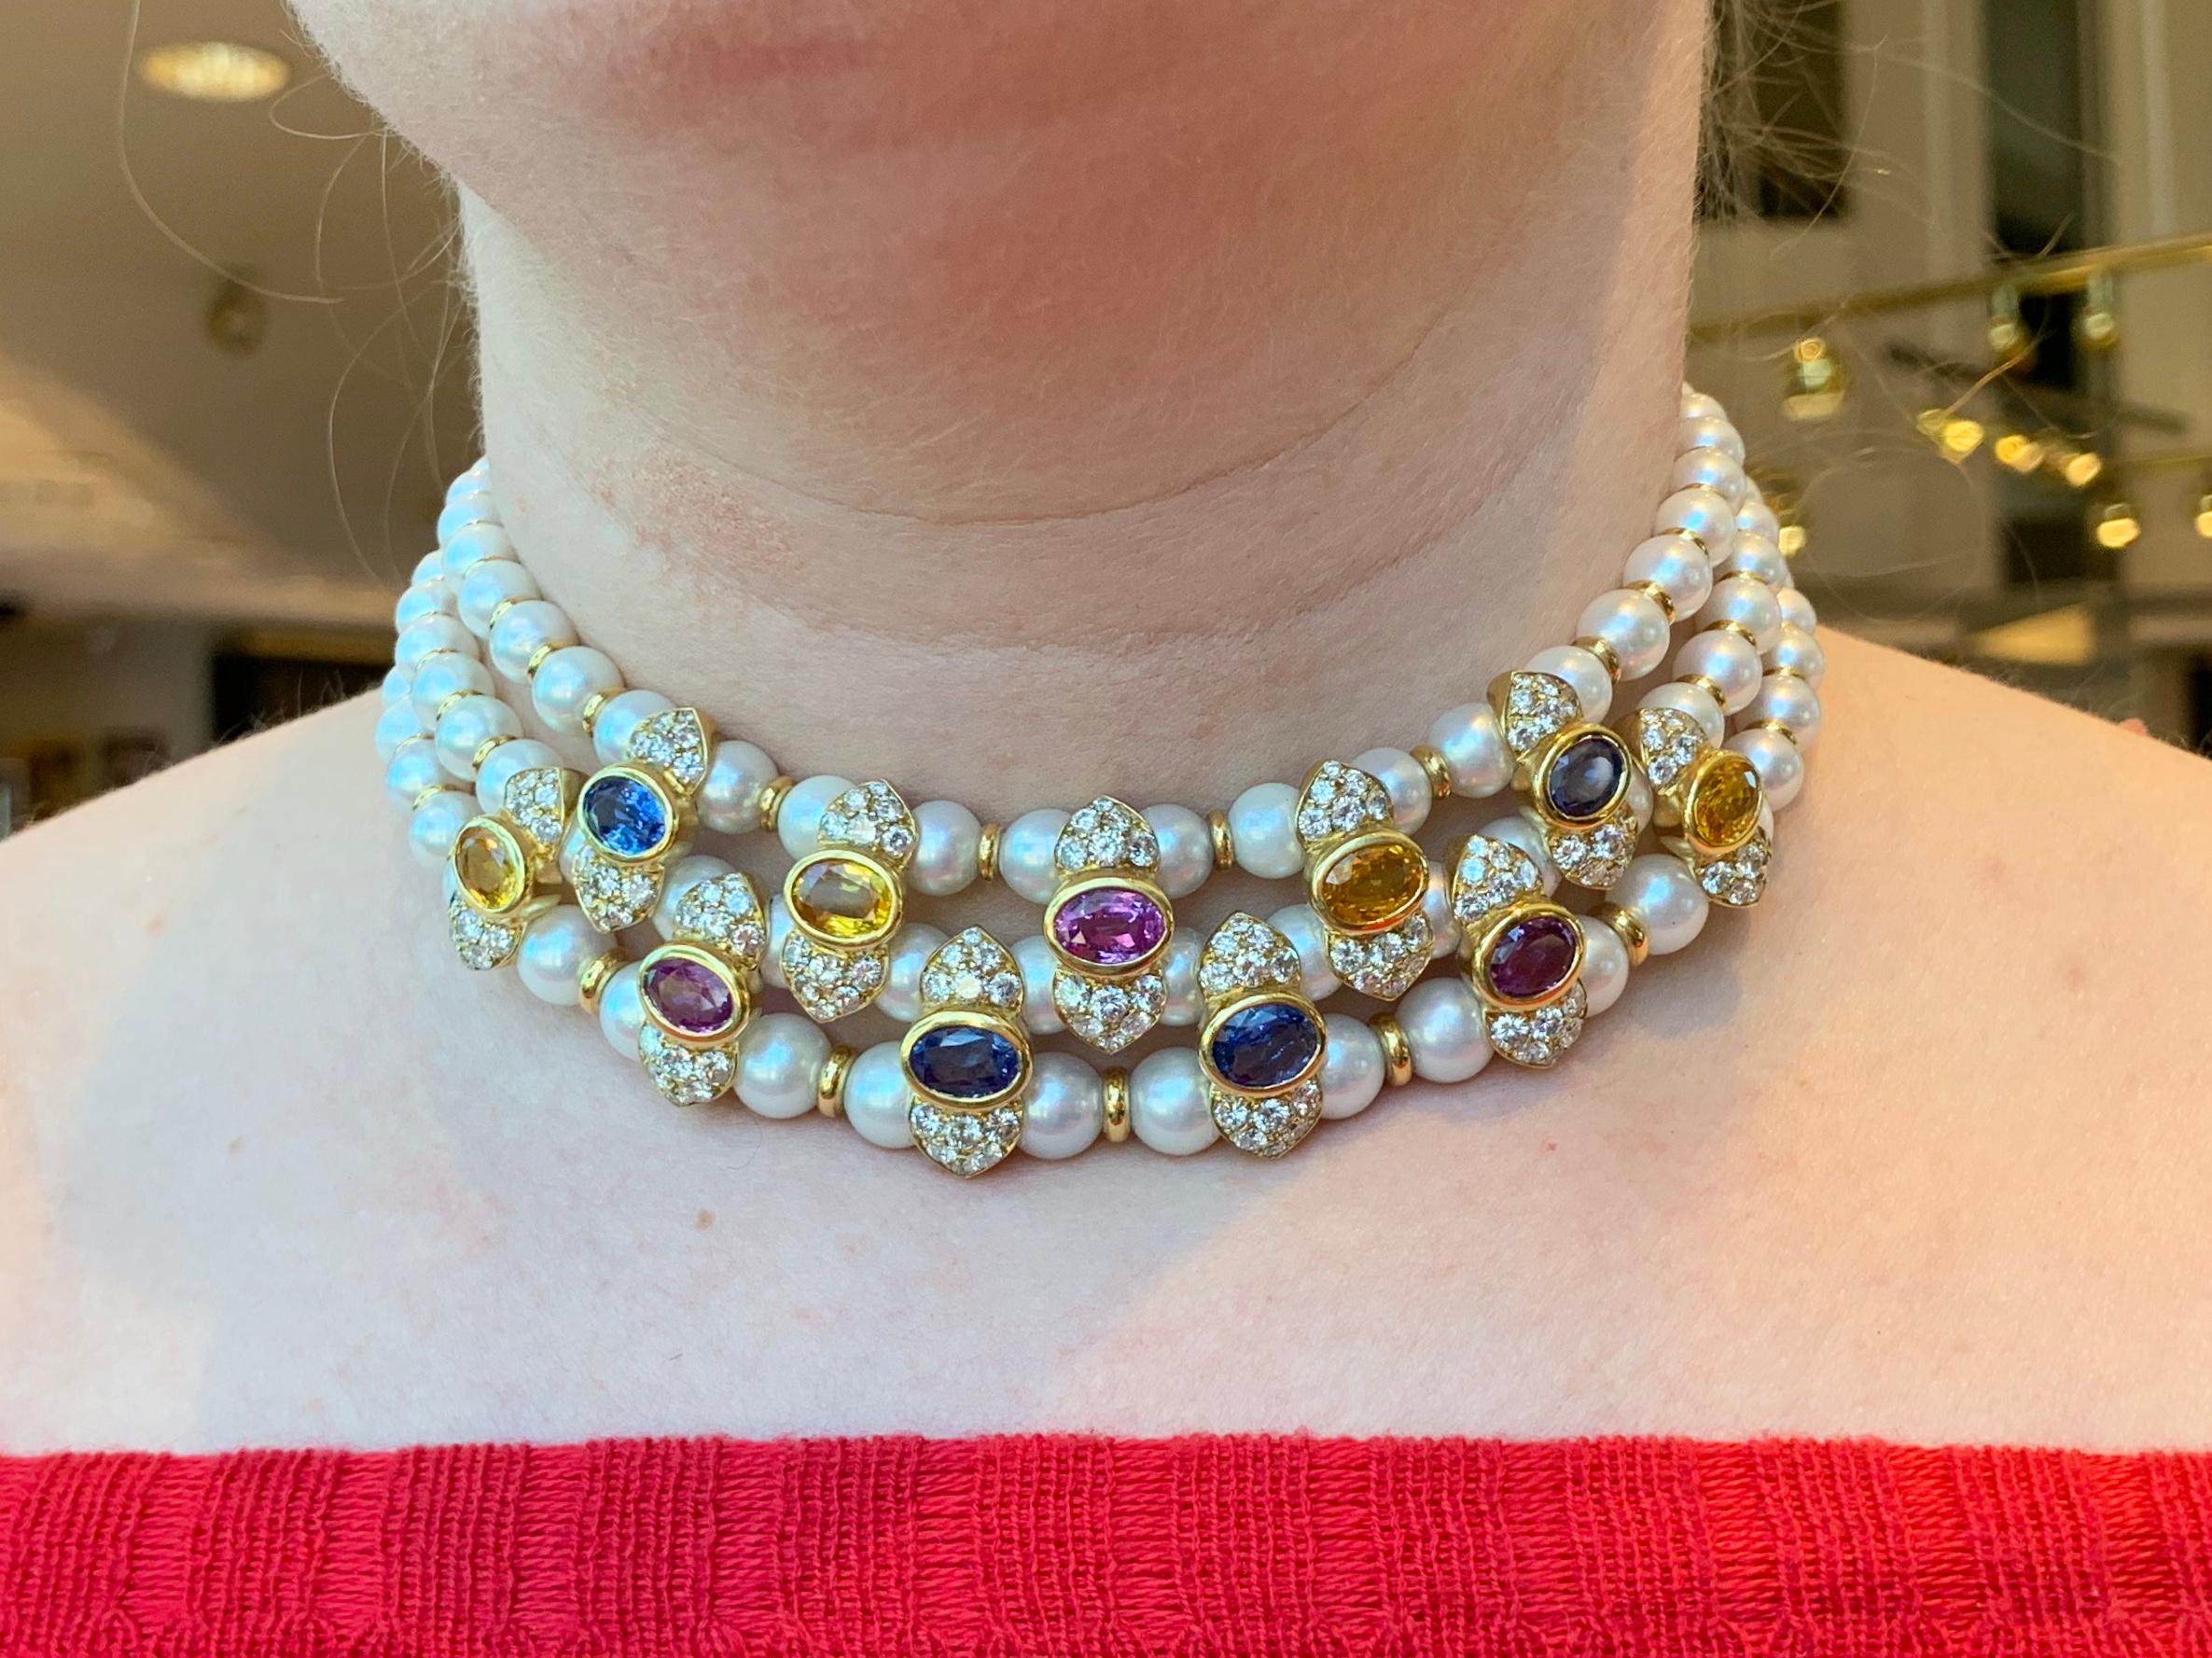 18 Karat Victorian Inspired Pearl, Sapphire and Diamond Choker Necklace For Sale 4